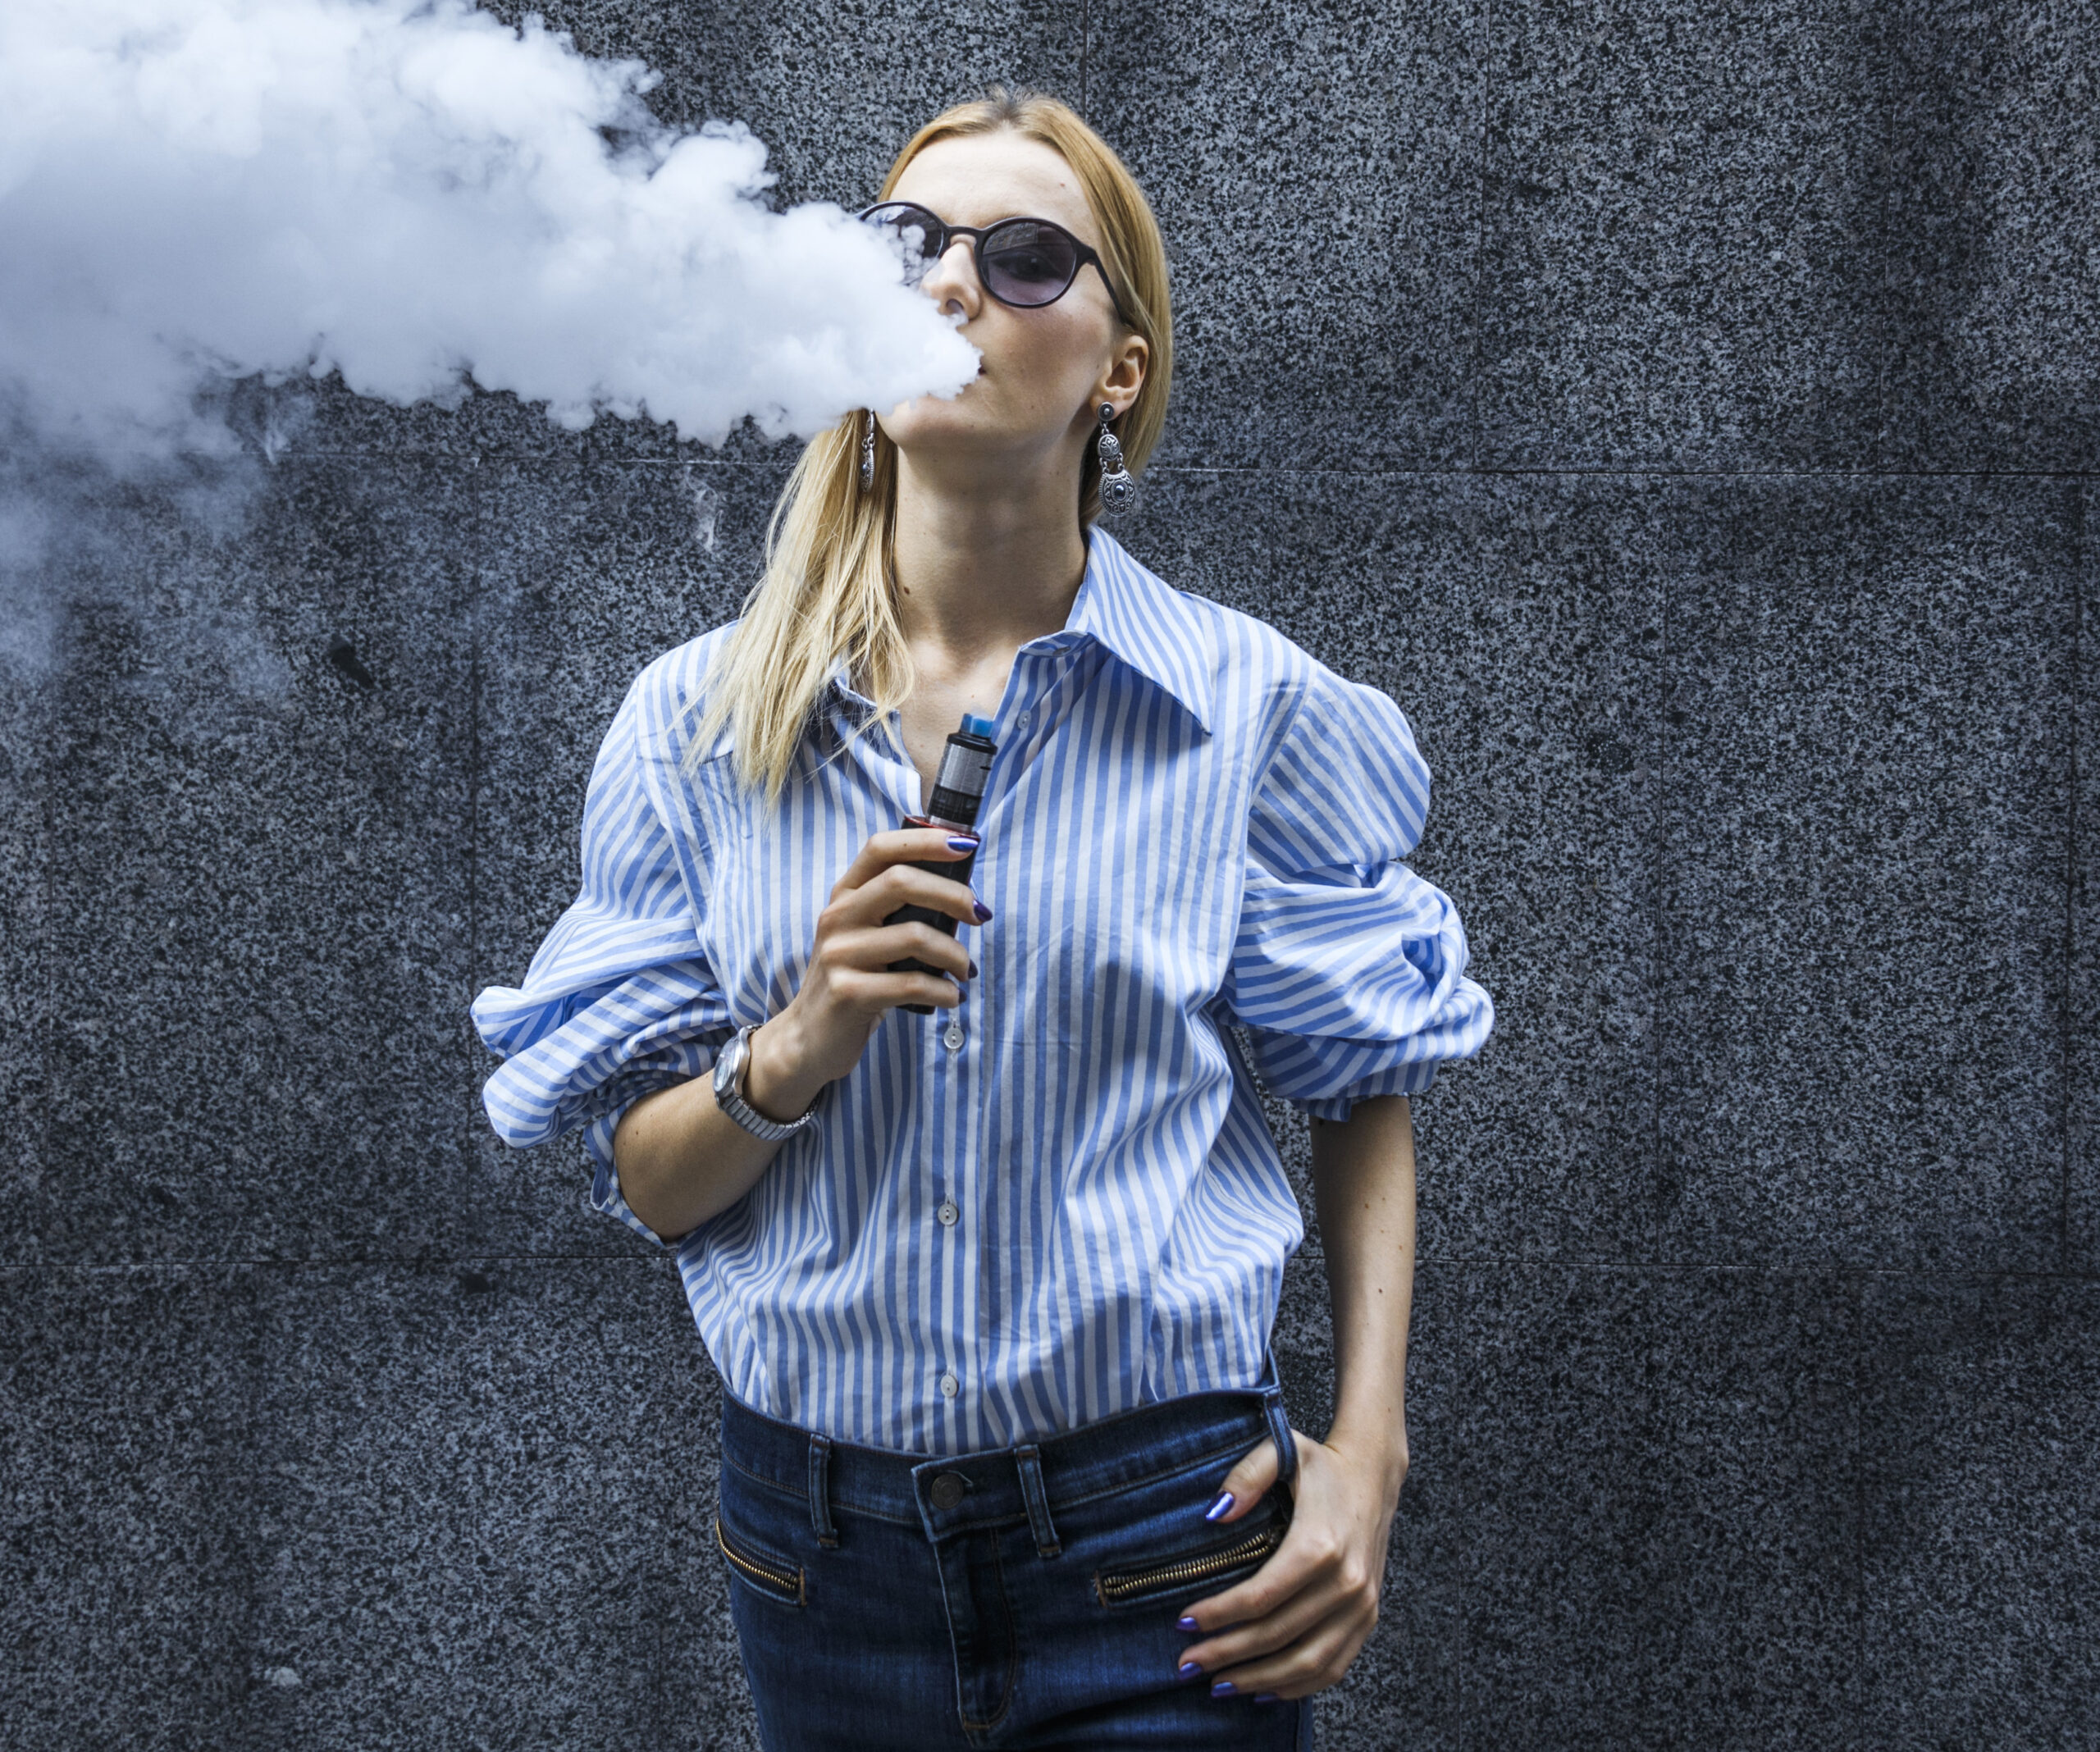 Is vaping bad for you? A cardiothoracic surgeon gives her expert opinion